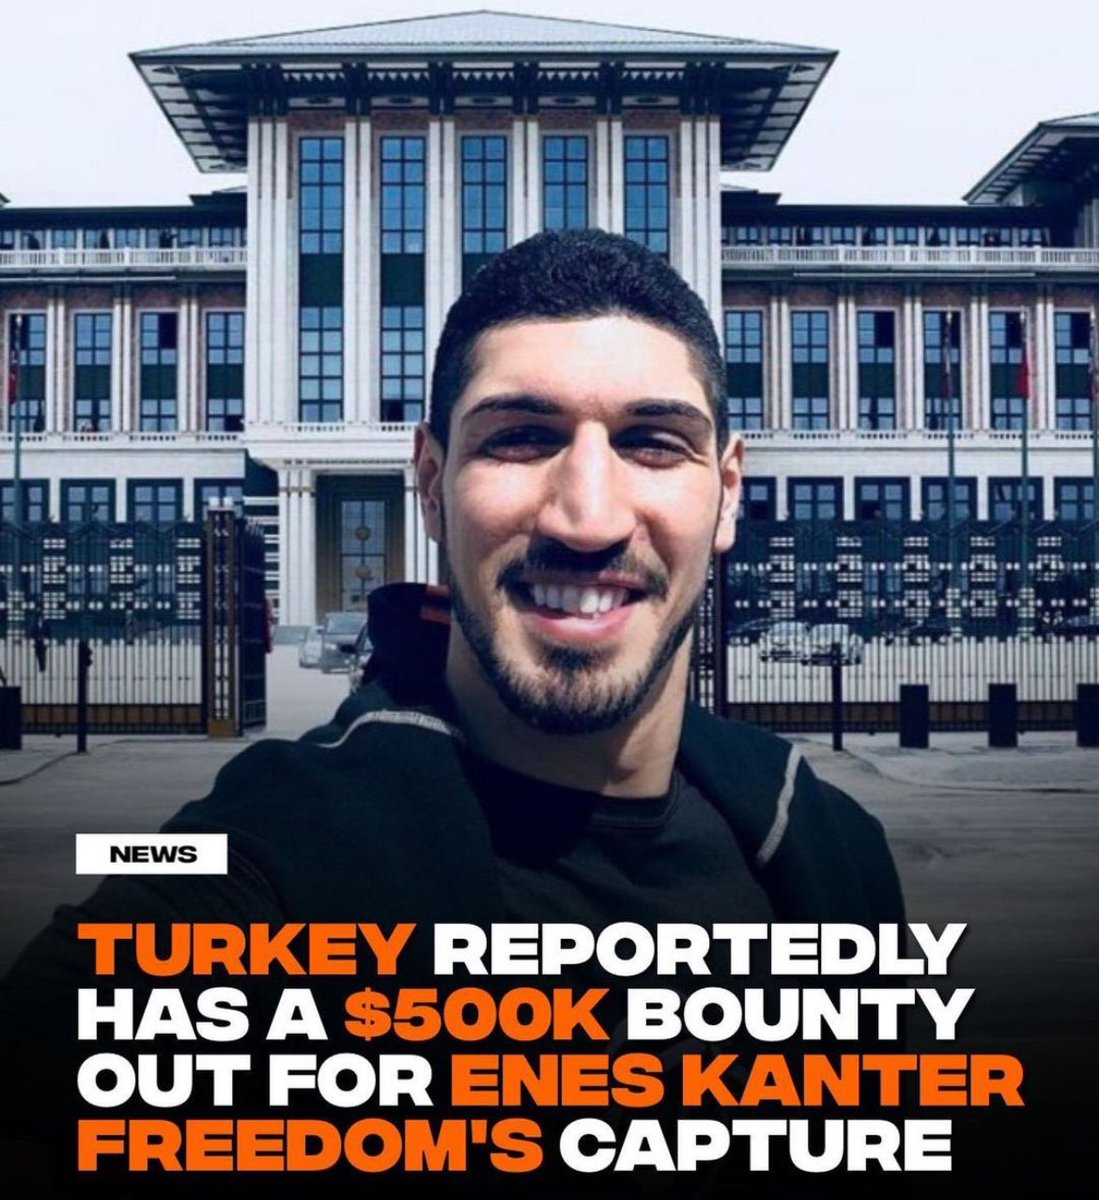 lets take a look at “Enes Freedom” resume: -5 teams in 11 years -8/6/1 career playoff numbers - universally known as the worst P&R defender ever -got ran out of the league -mickey mouse WWE championship win -got labeled as a terrorist by his home country -got his passport…